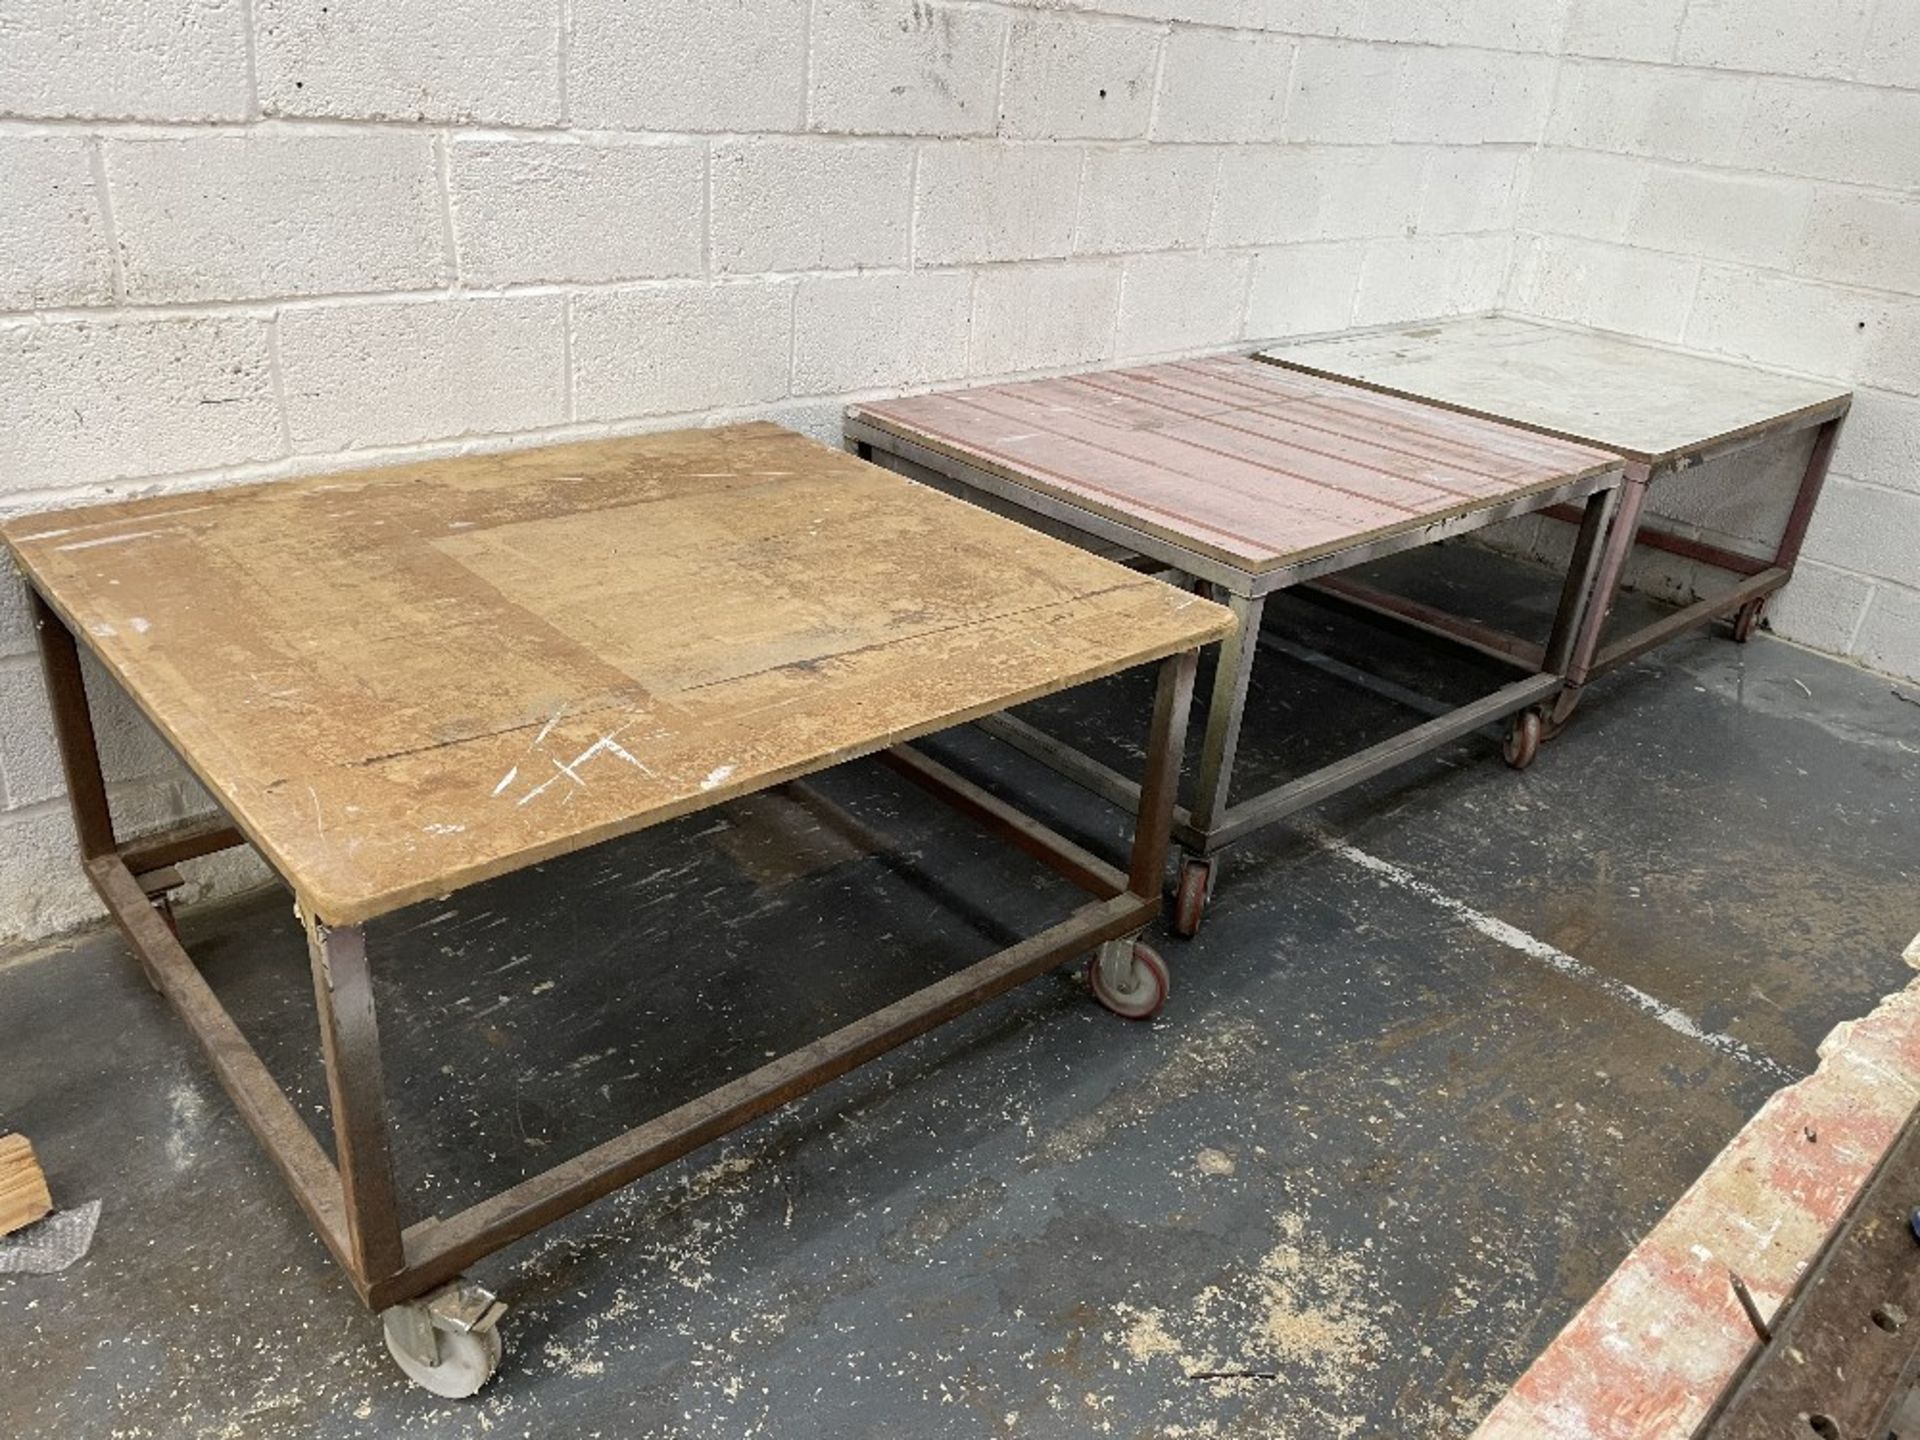 3 x Wood Topped Mobile Fabricated Tables